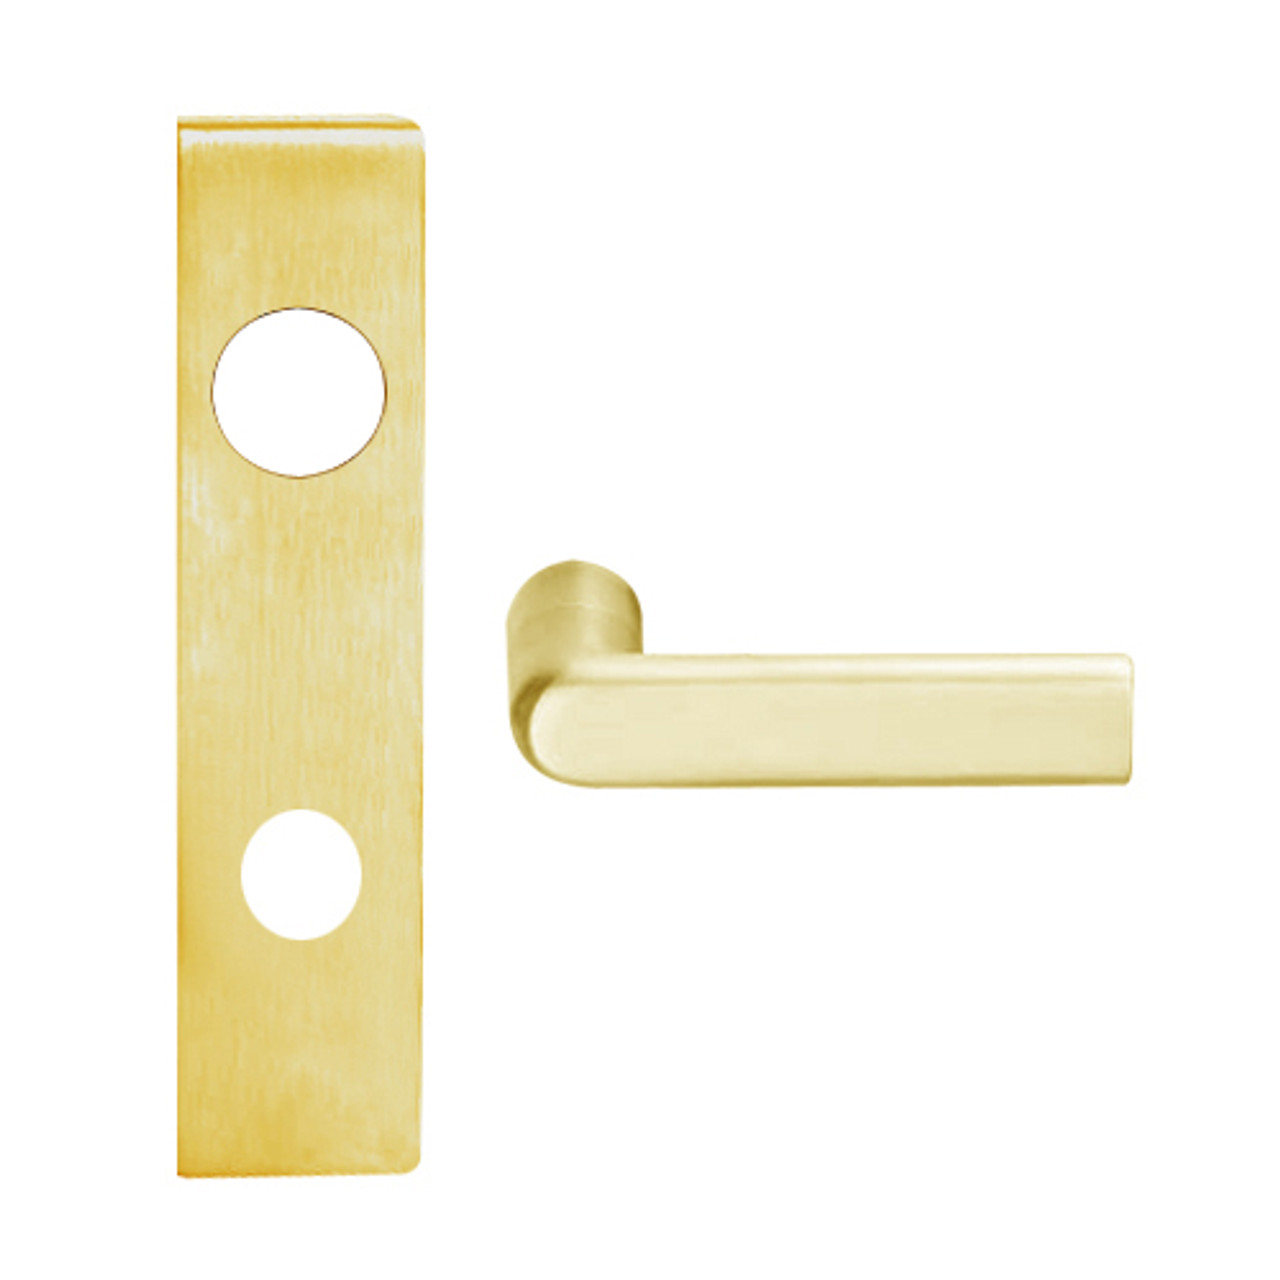 L9026R-01L-605 Schlage L Series Exit Lock with Cylinder Commercial Mortise Lock with 01 Cast Lever Design and Full Size Core in Bright Brass